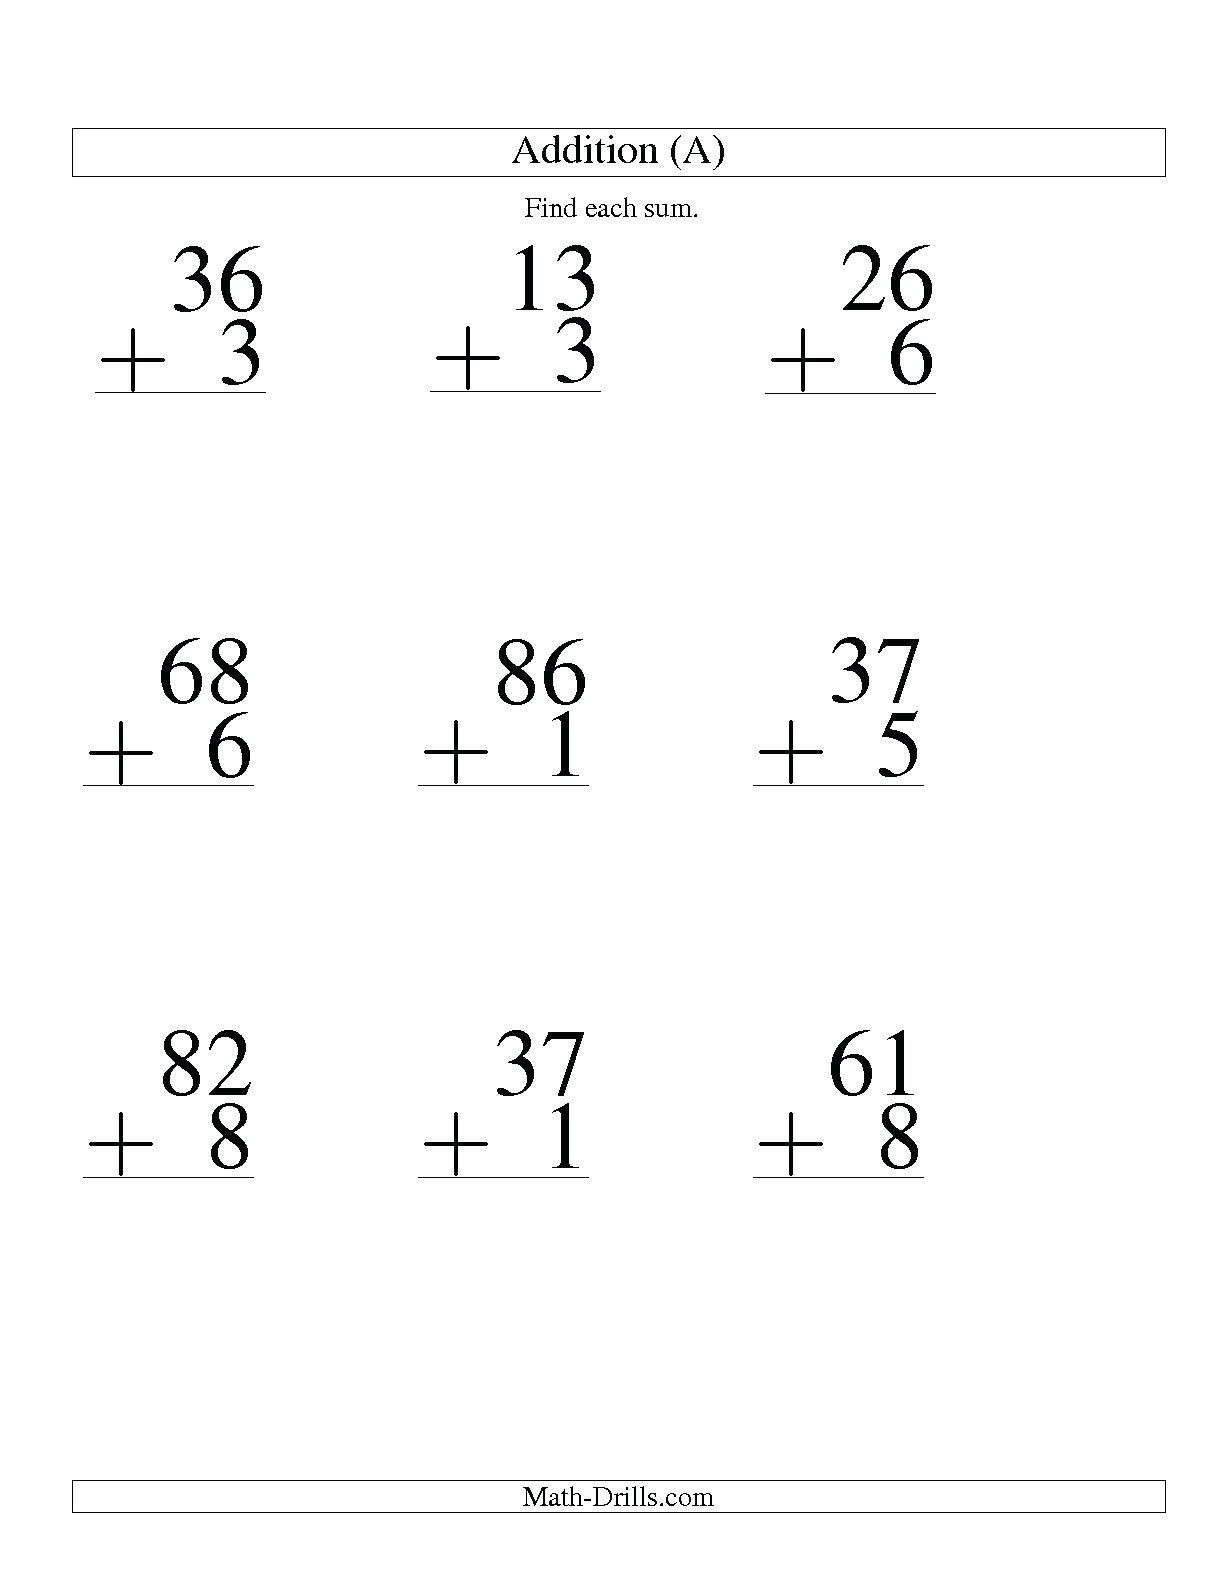 5 Free Math Worksheets First Grade 1 Addition Adding 2 Digit Plus 1 Digit No Regrouping AMP